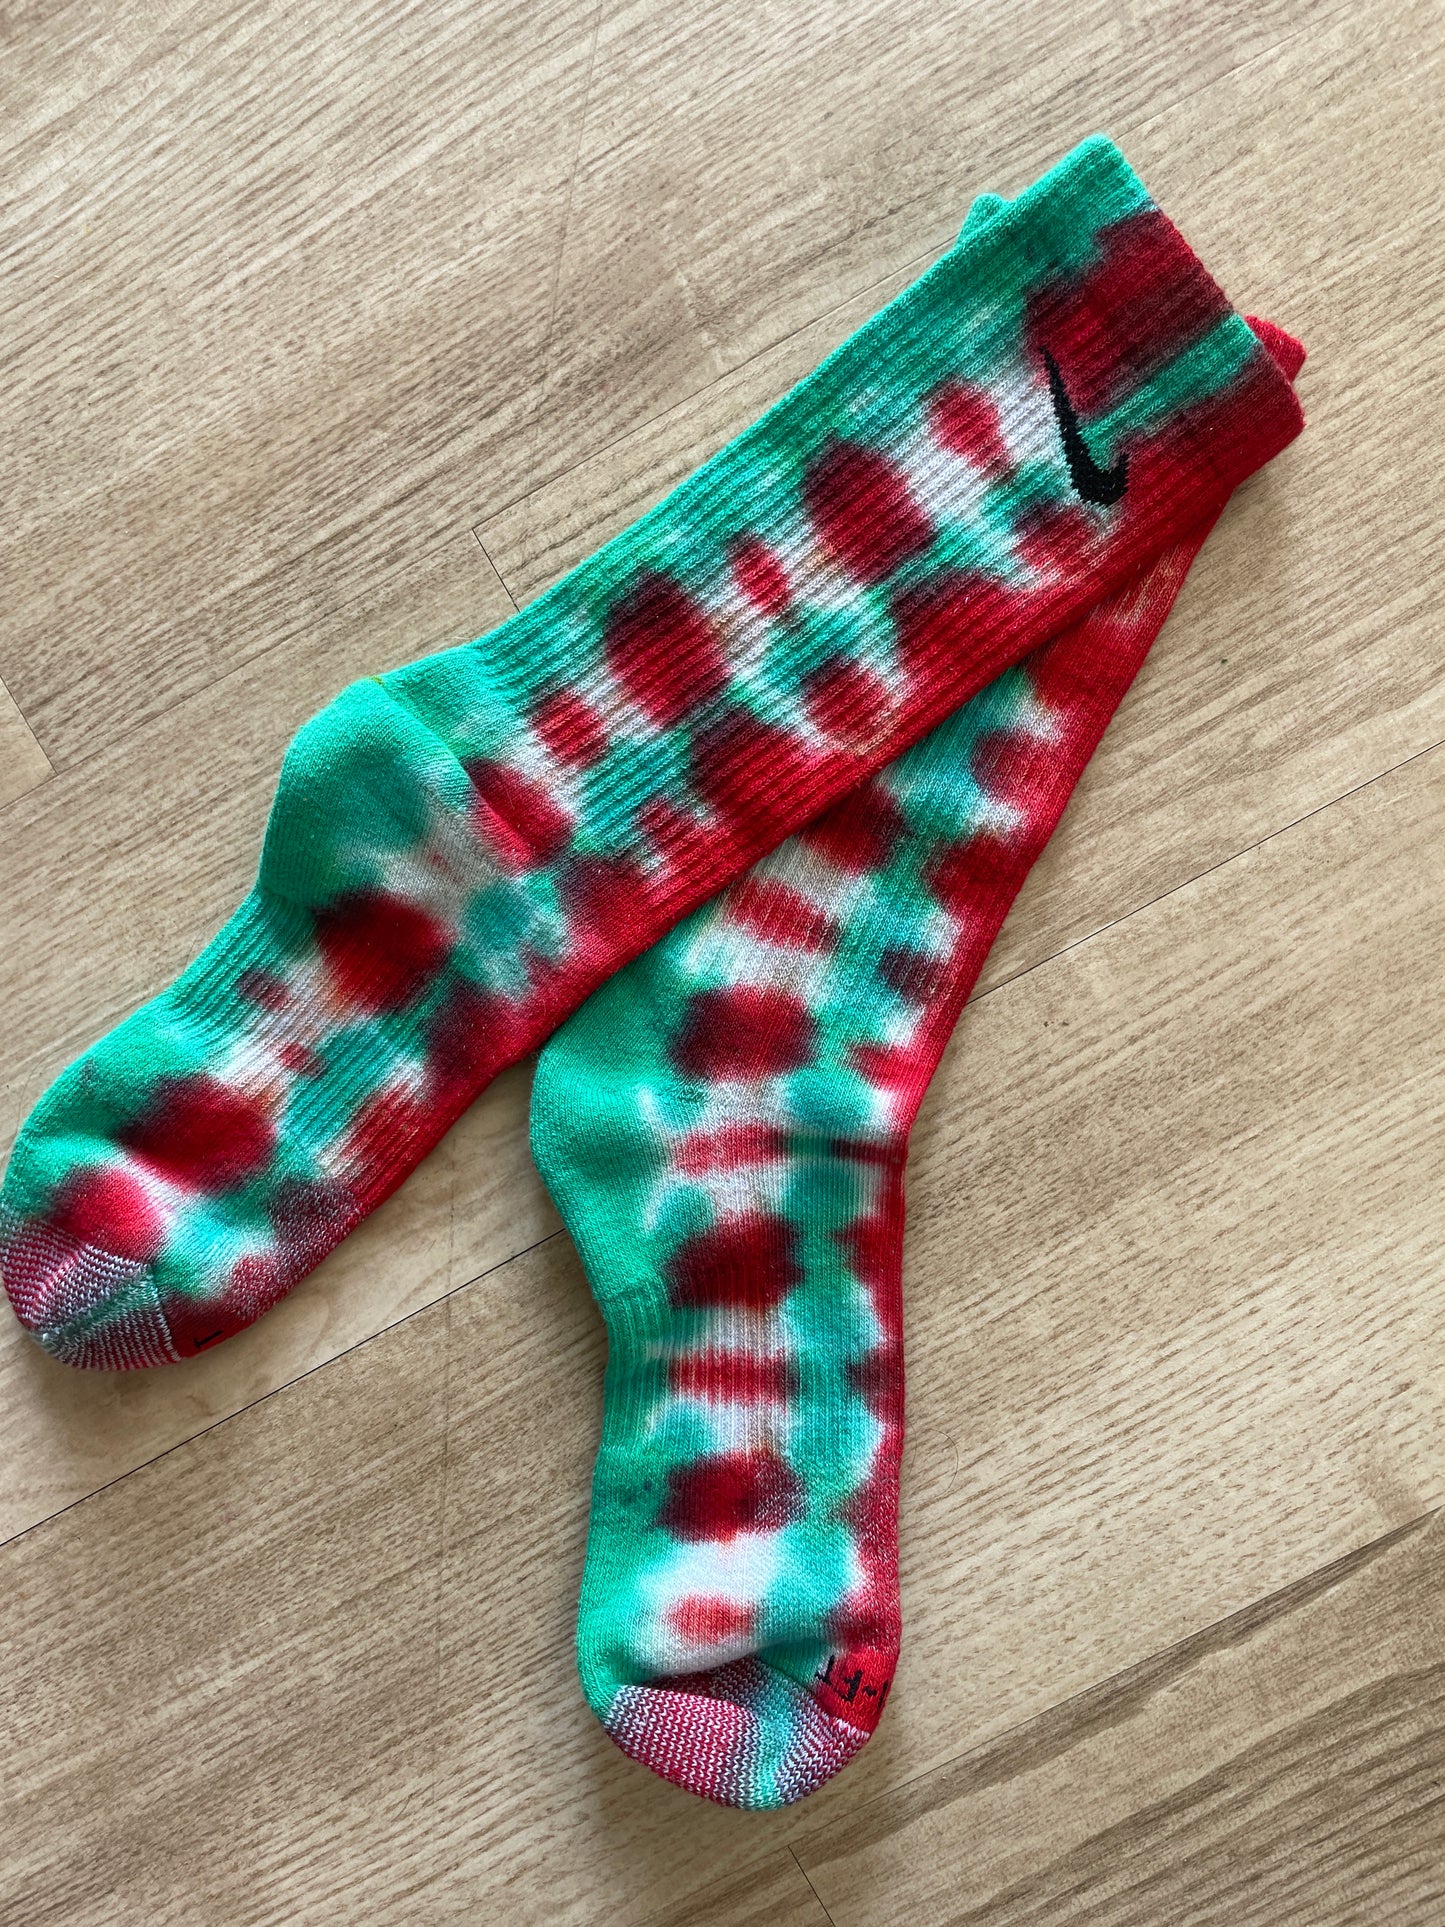 NIKE Christmas Socks Hand Tie Dyed Red and Green Nike Dri-FIT Everyday Plus Crew Training Socks - Size Large (Men's 8-12/Women's 10-13)